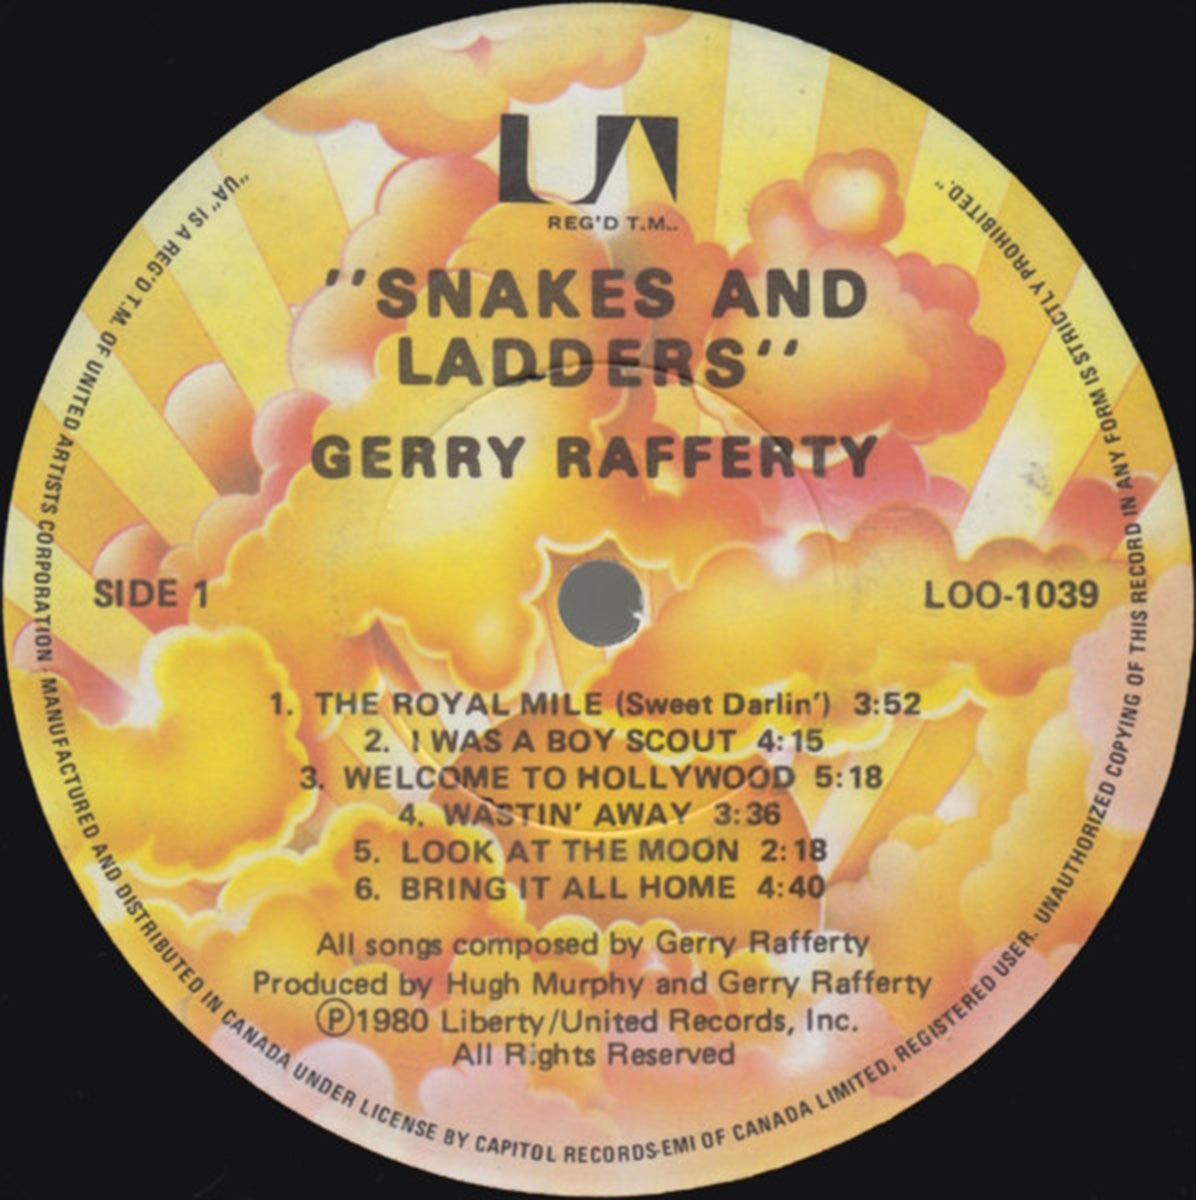 Gerry Rafferty – Snakes And Ladders - 1980